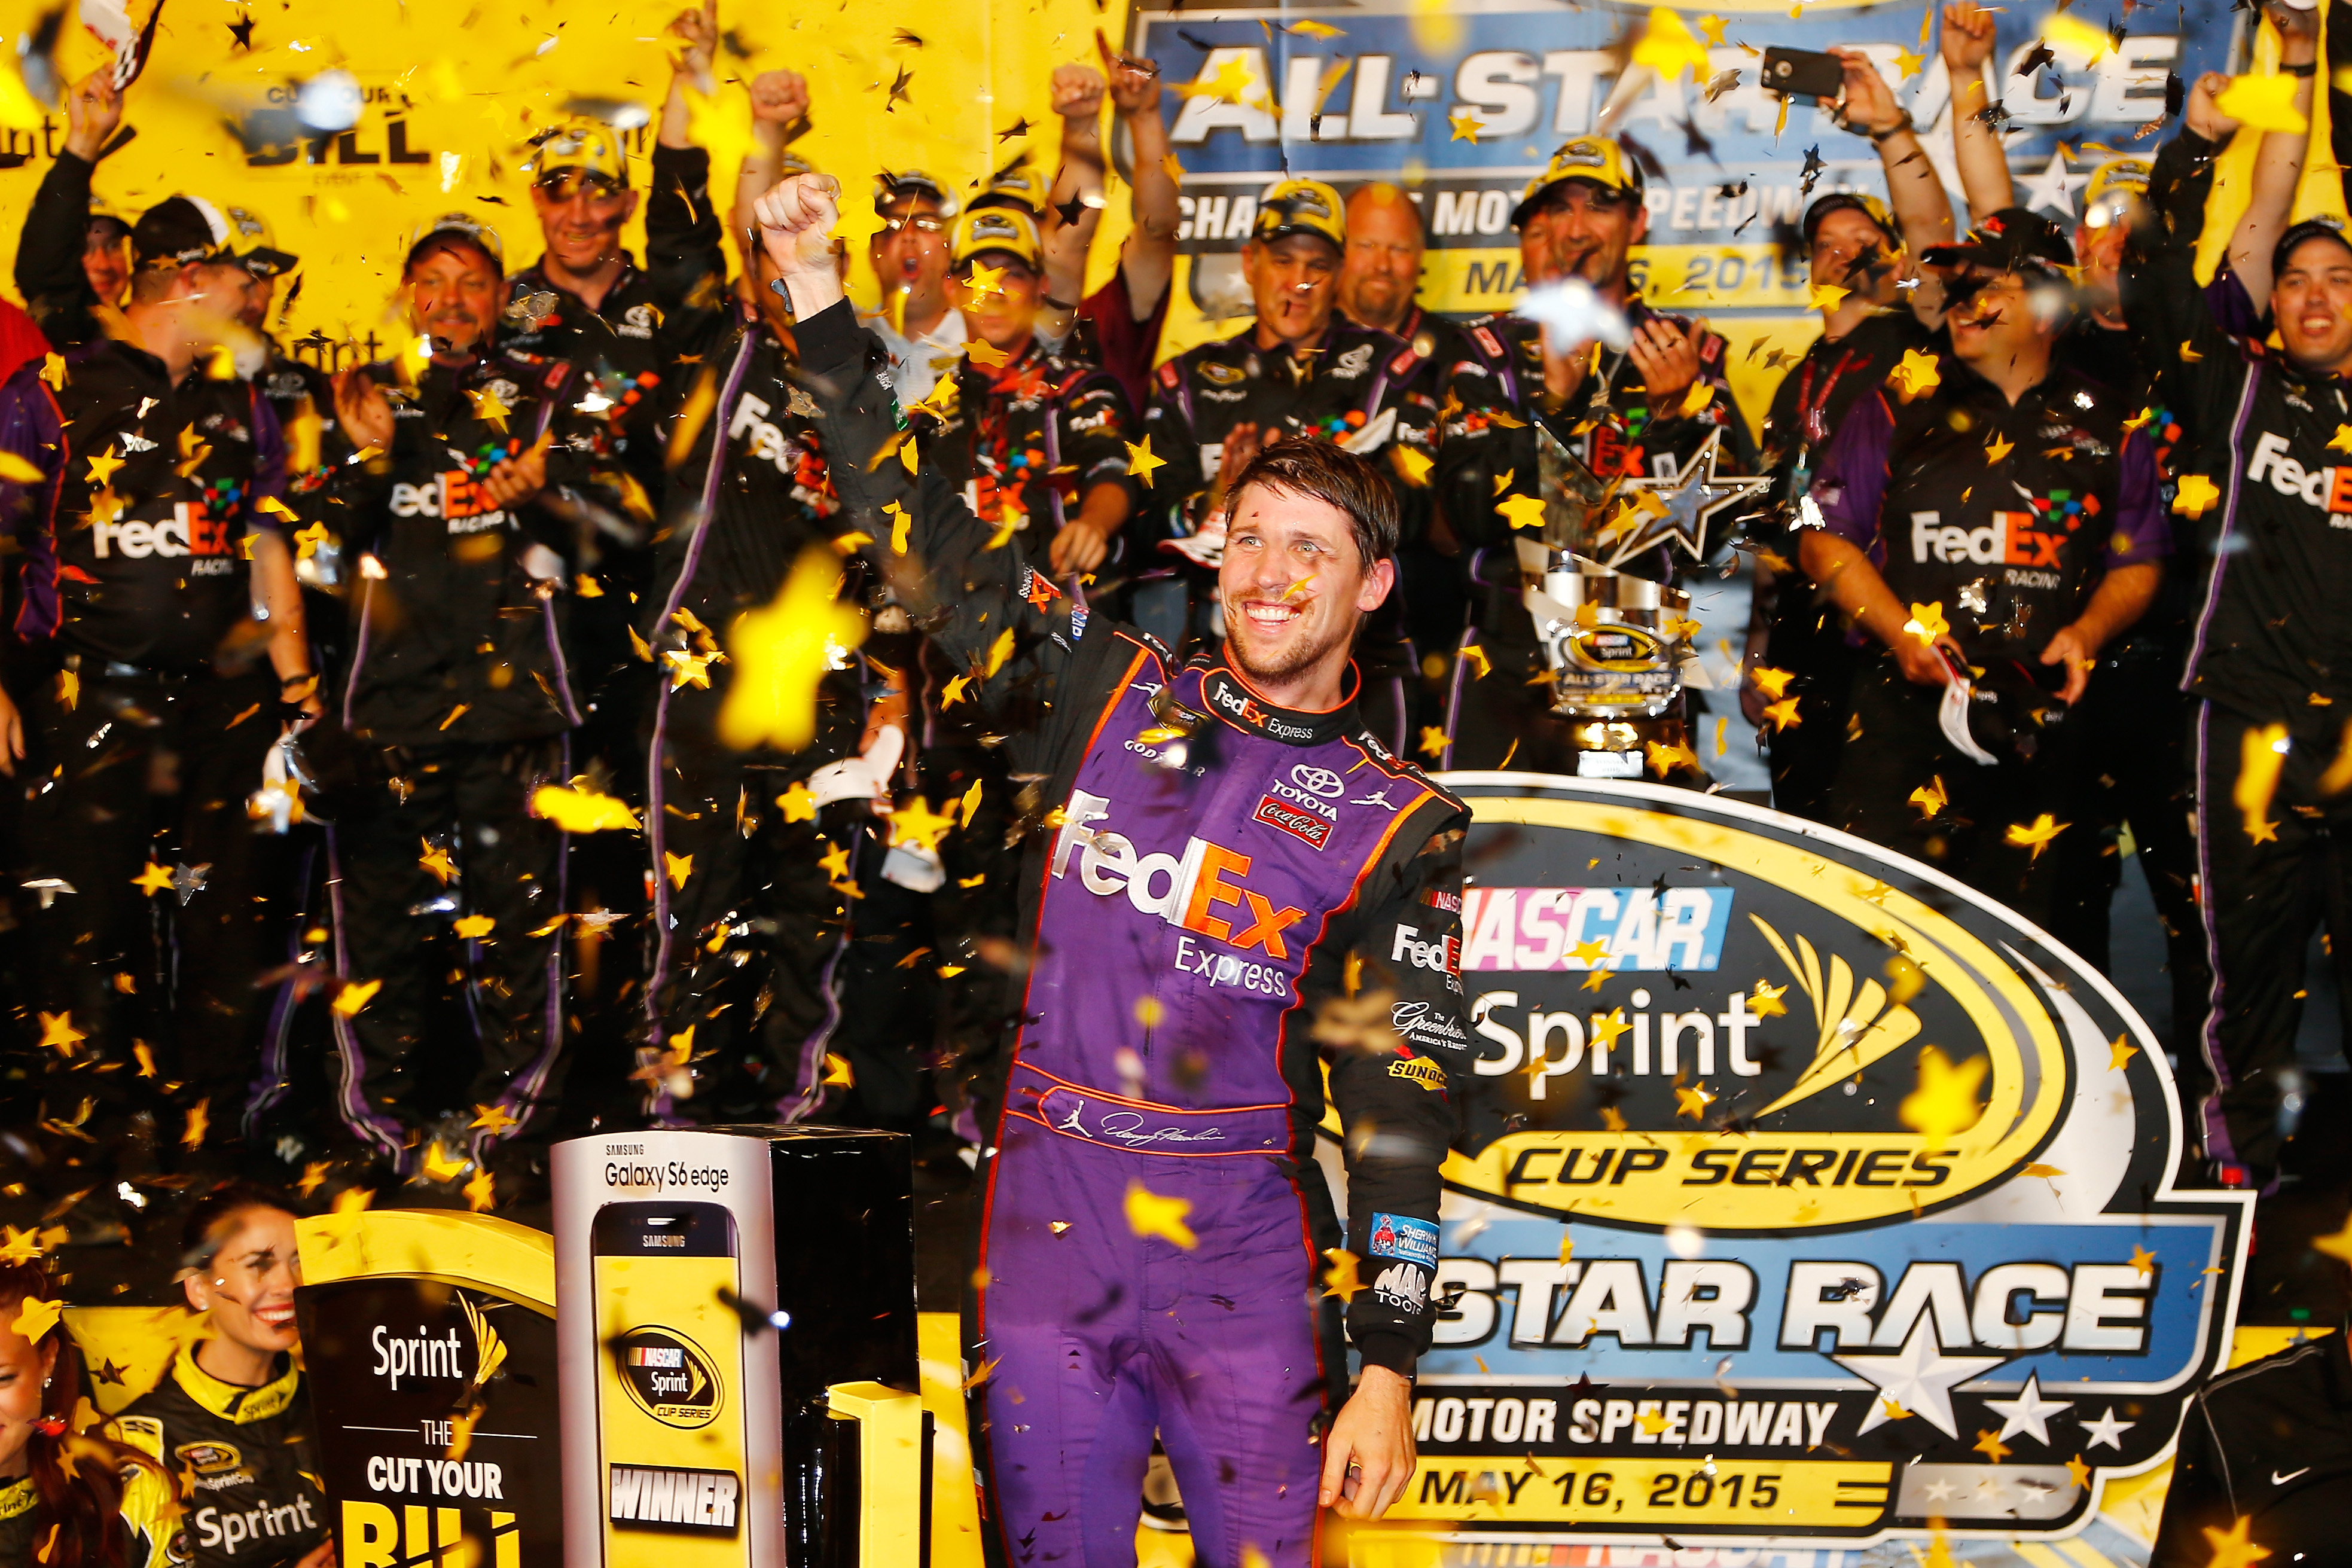 Denny Hamlin is this year's All-Star Race winner, in a race that is sort of becoming lack-luster.